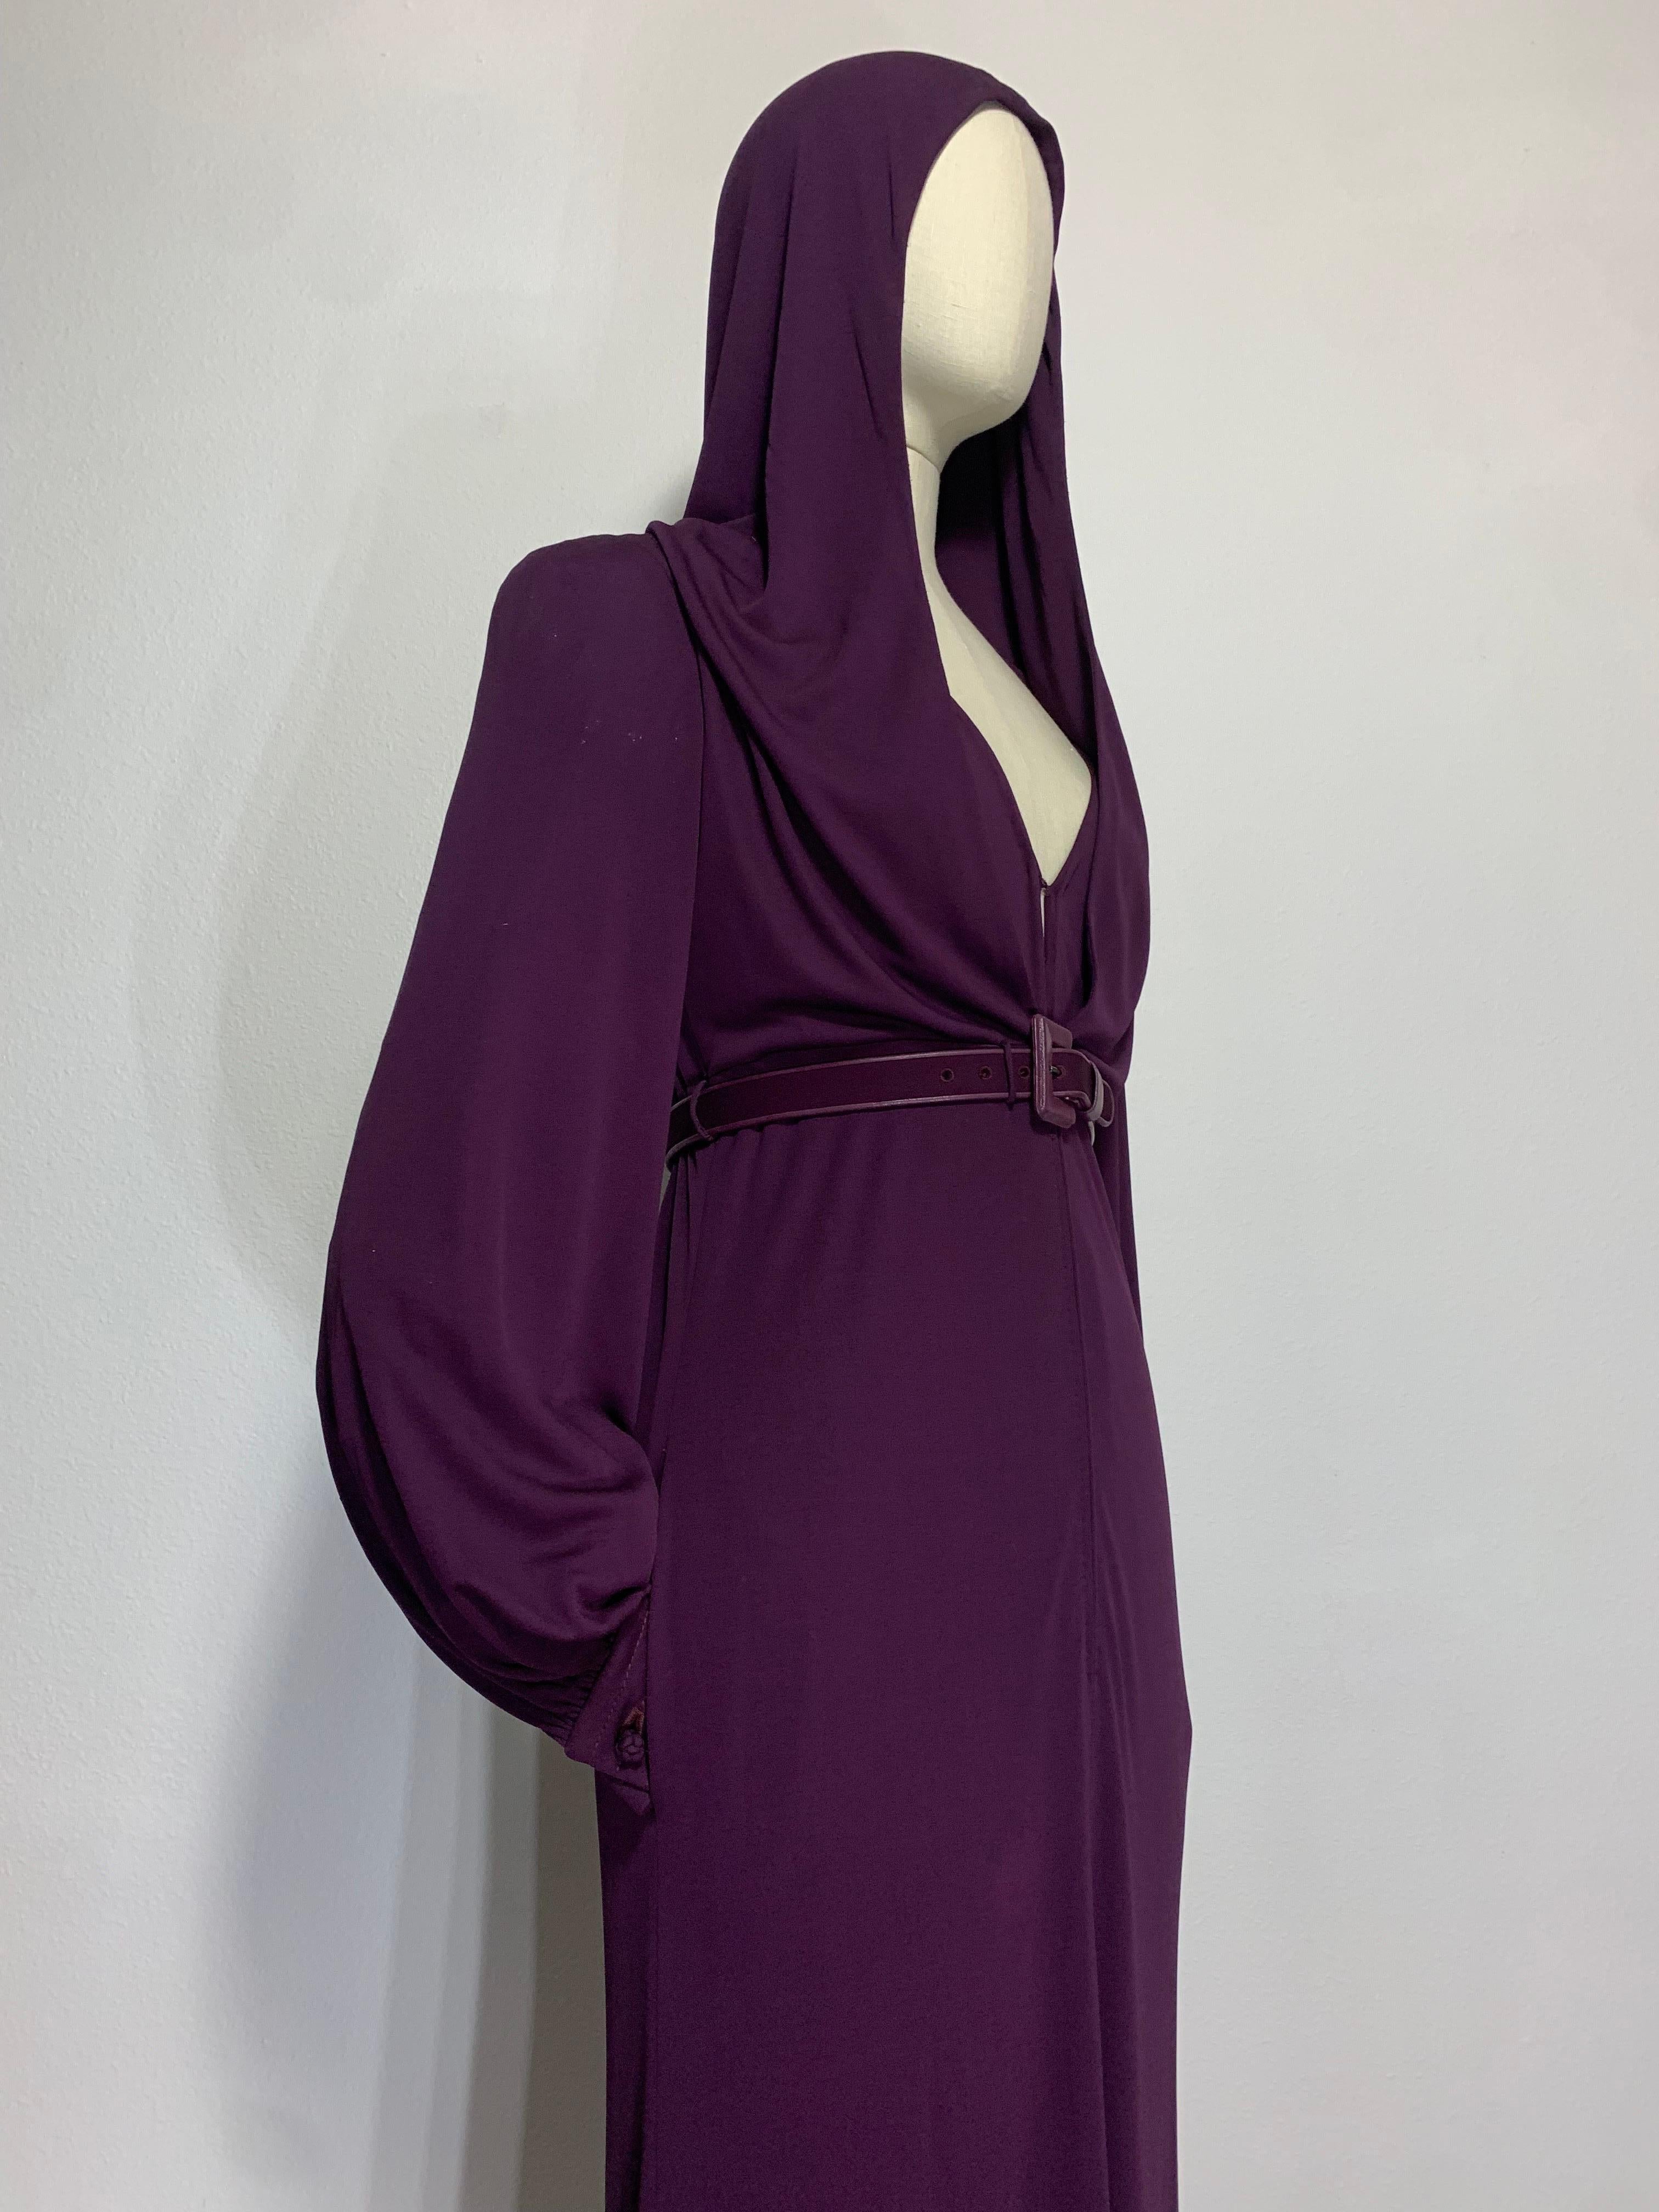 1975 James Galanos Dramatic Aubergine Jersey Maxi Gown w Fabulous Draped Hood For Sale 10